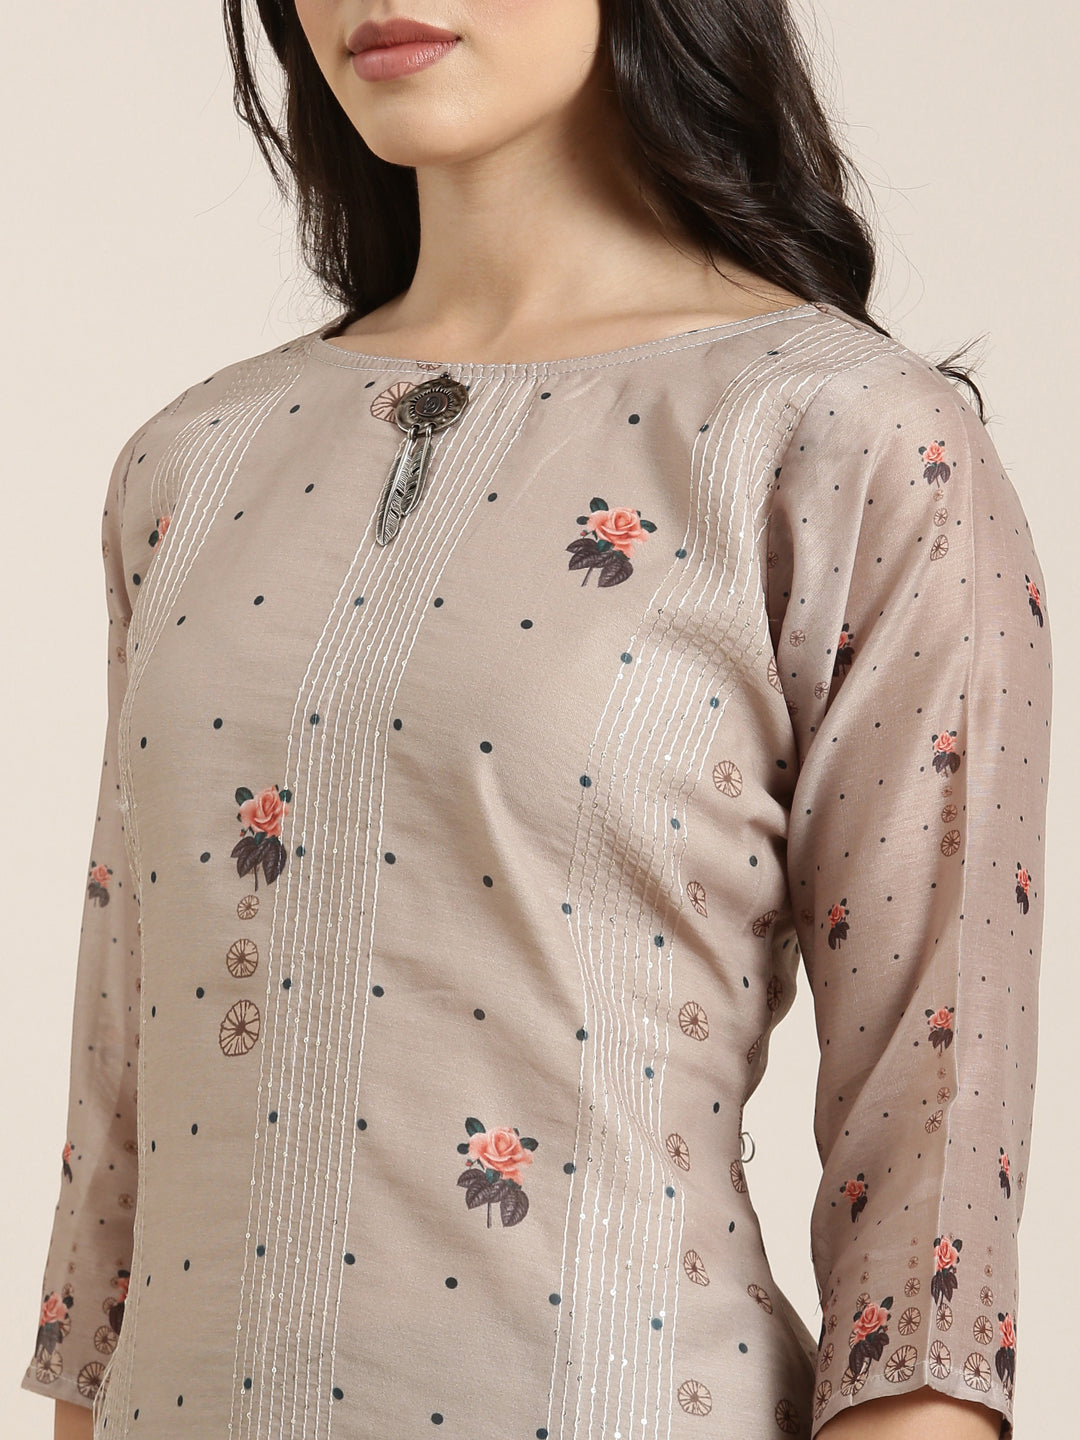 Women Straight Olive Floral Kurta and Trousers Set Comes With Dupatta